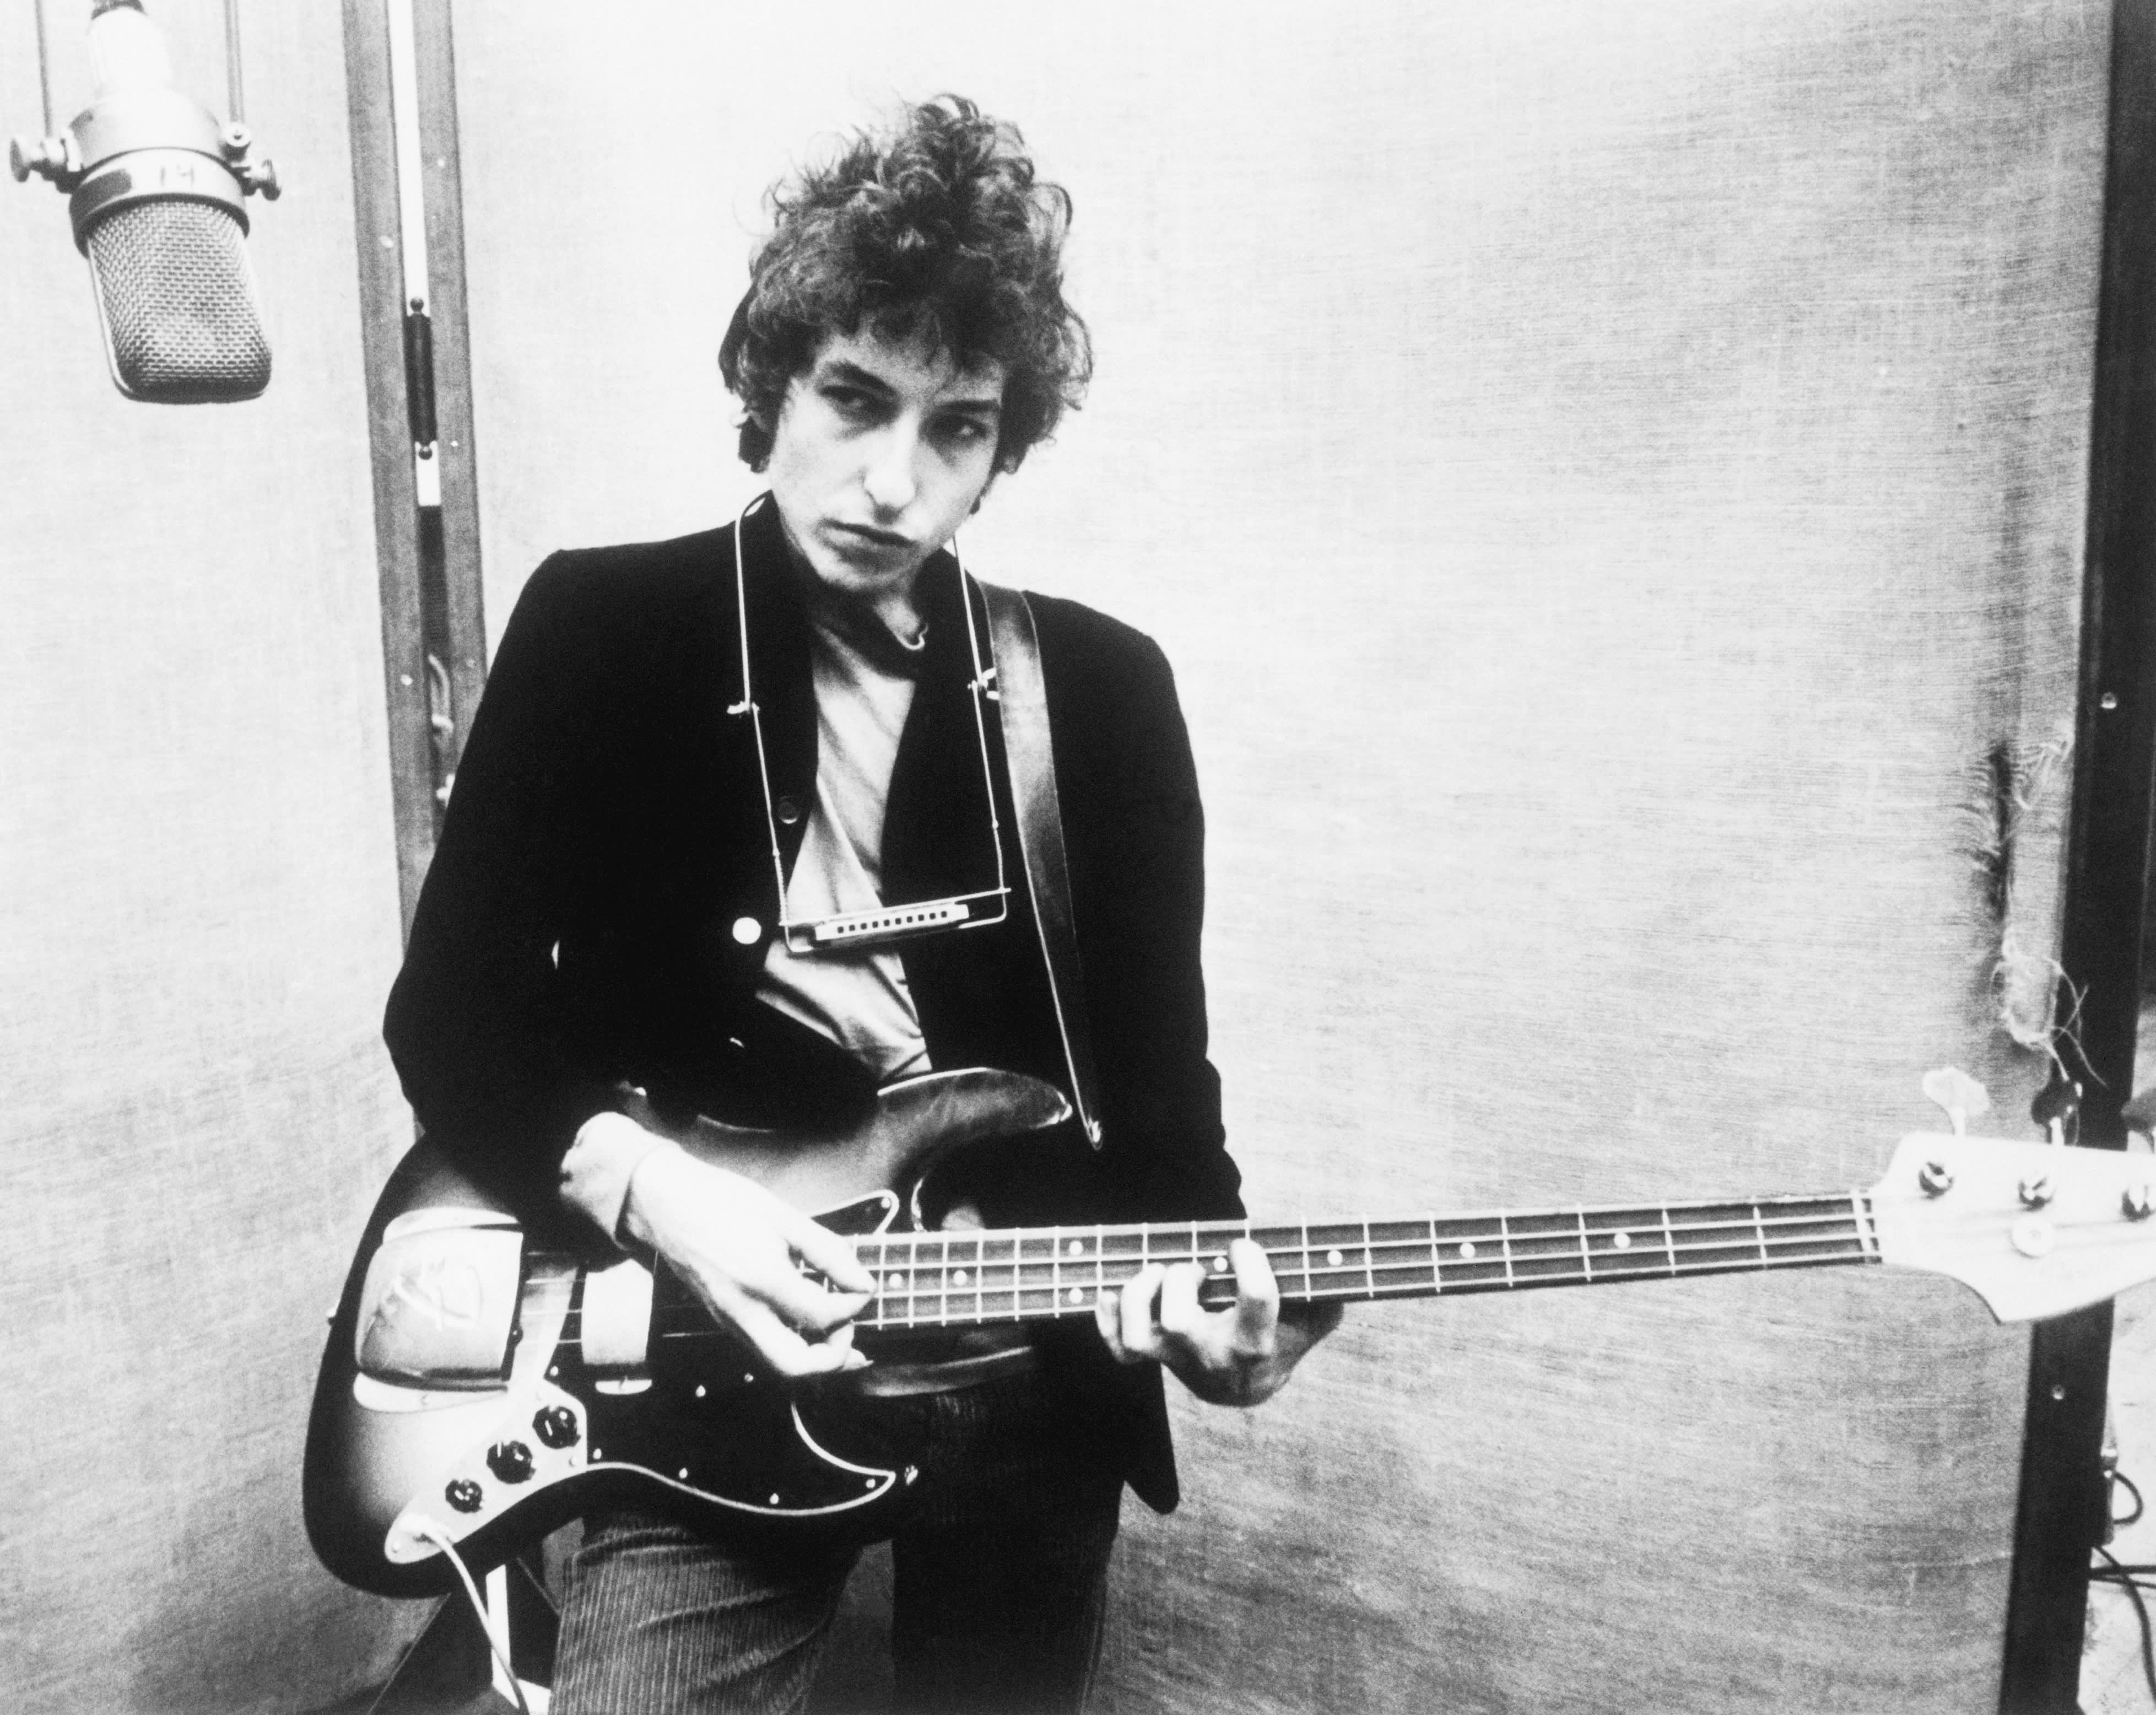 Woman sues Bob Dylan, alleging he sexually abused her in 1965, when she was 12